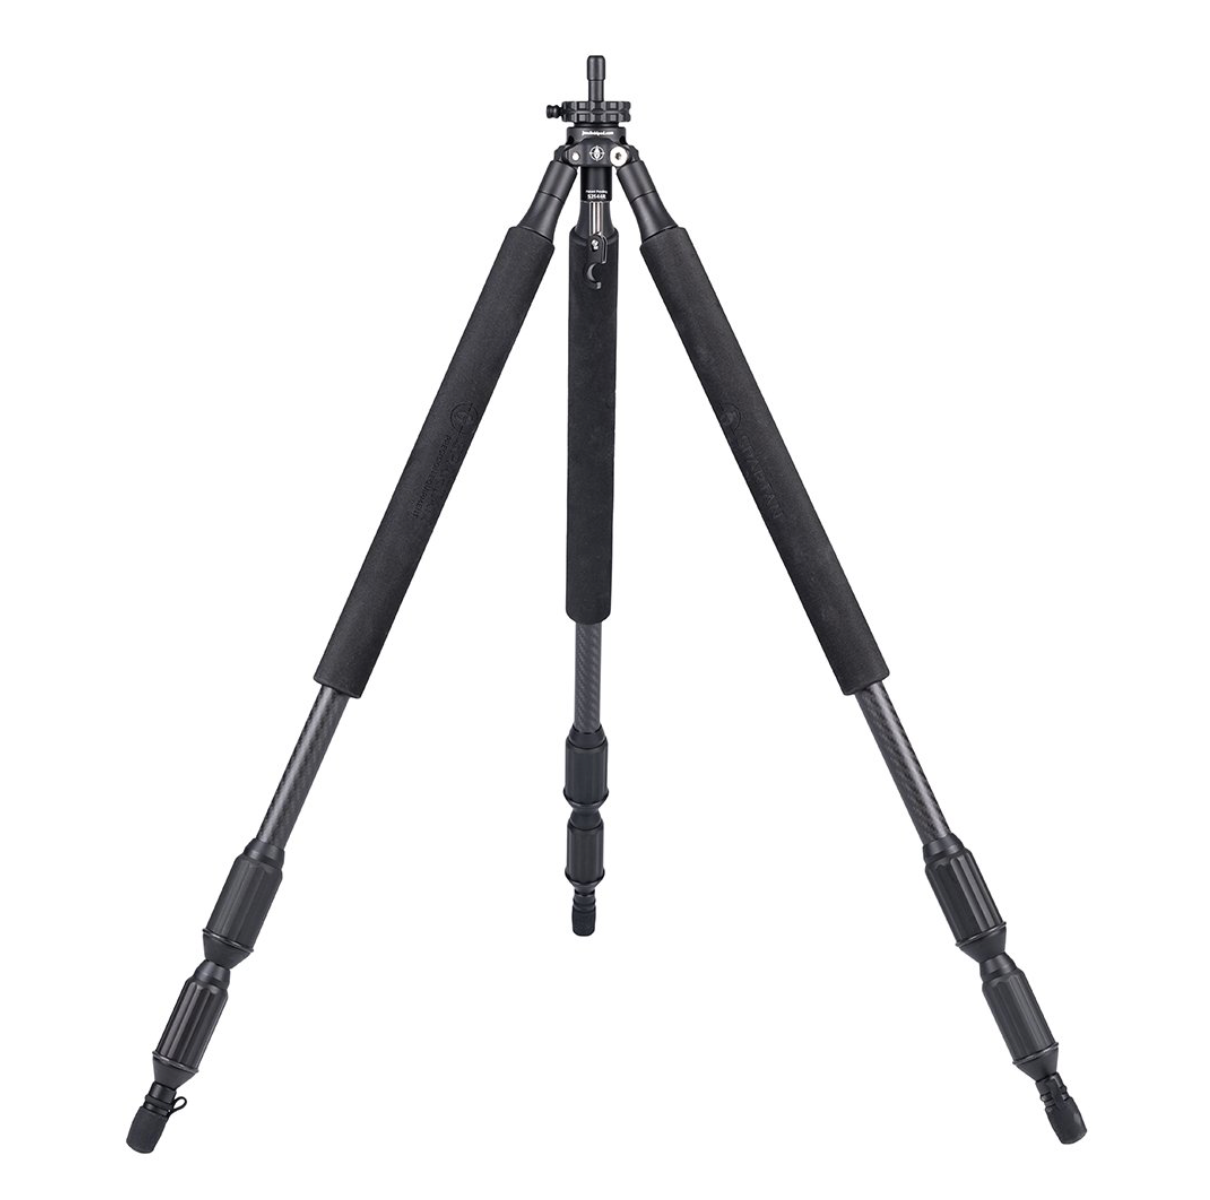 Spartan Precision Sentinel Tripod Woodland - Tall -  - Mansfield Hunting & Fishing - Products to prepare for Corona Virus